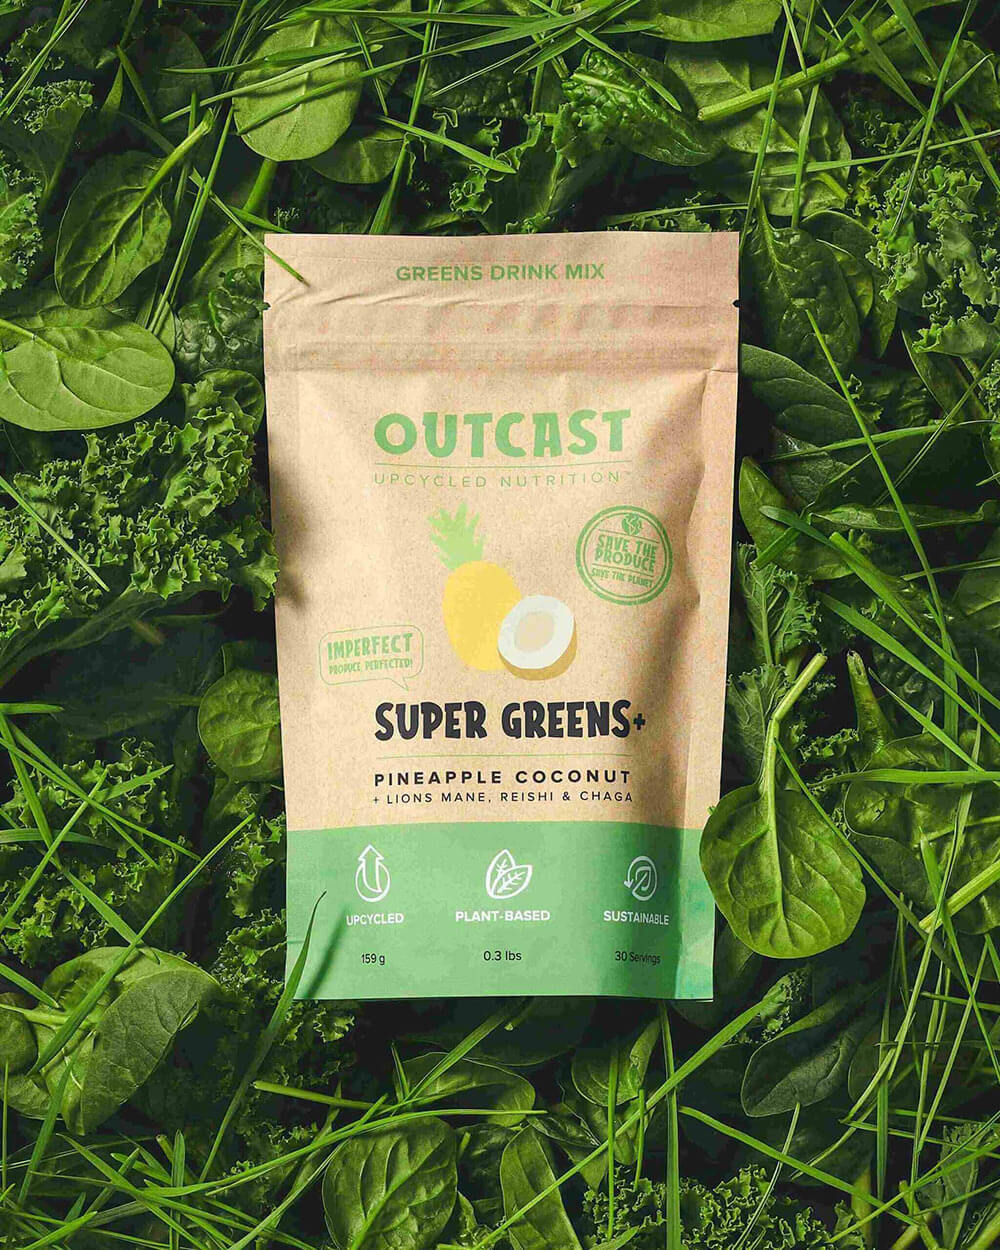 A picture of the Outcast Greens drink mix packet placed on green leaves.